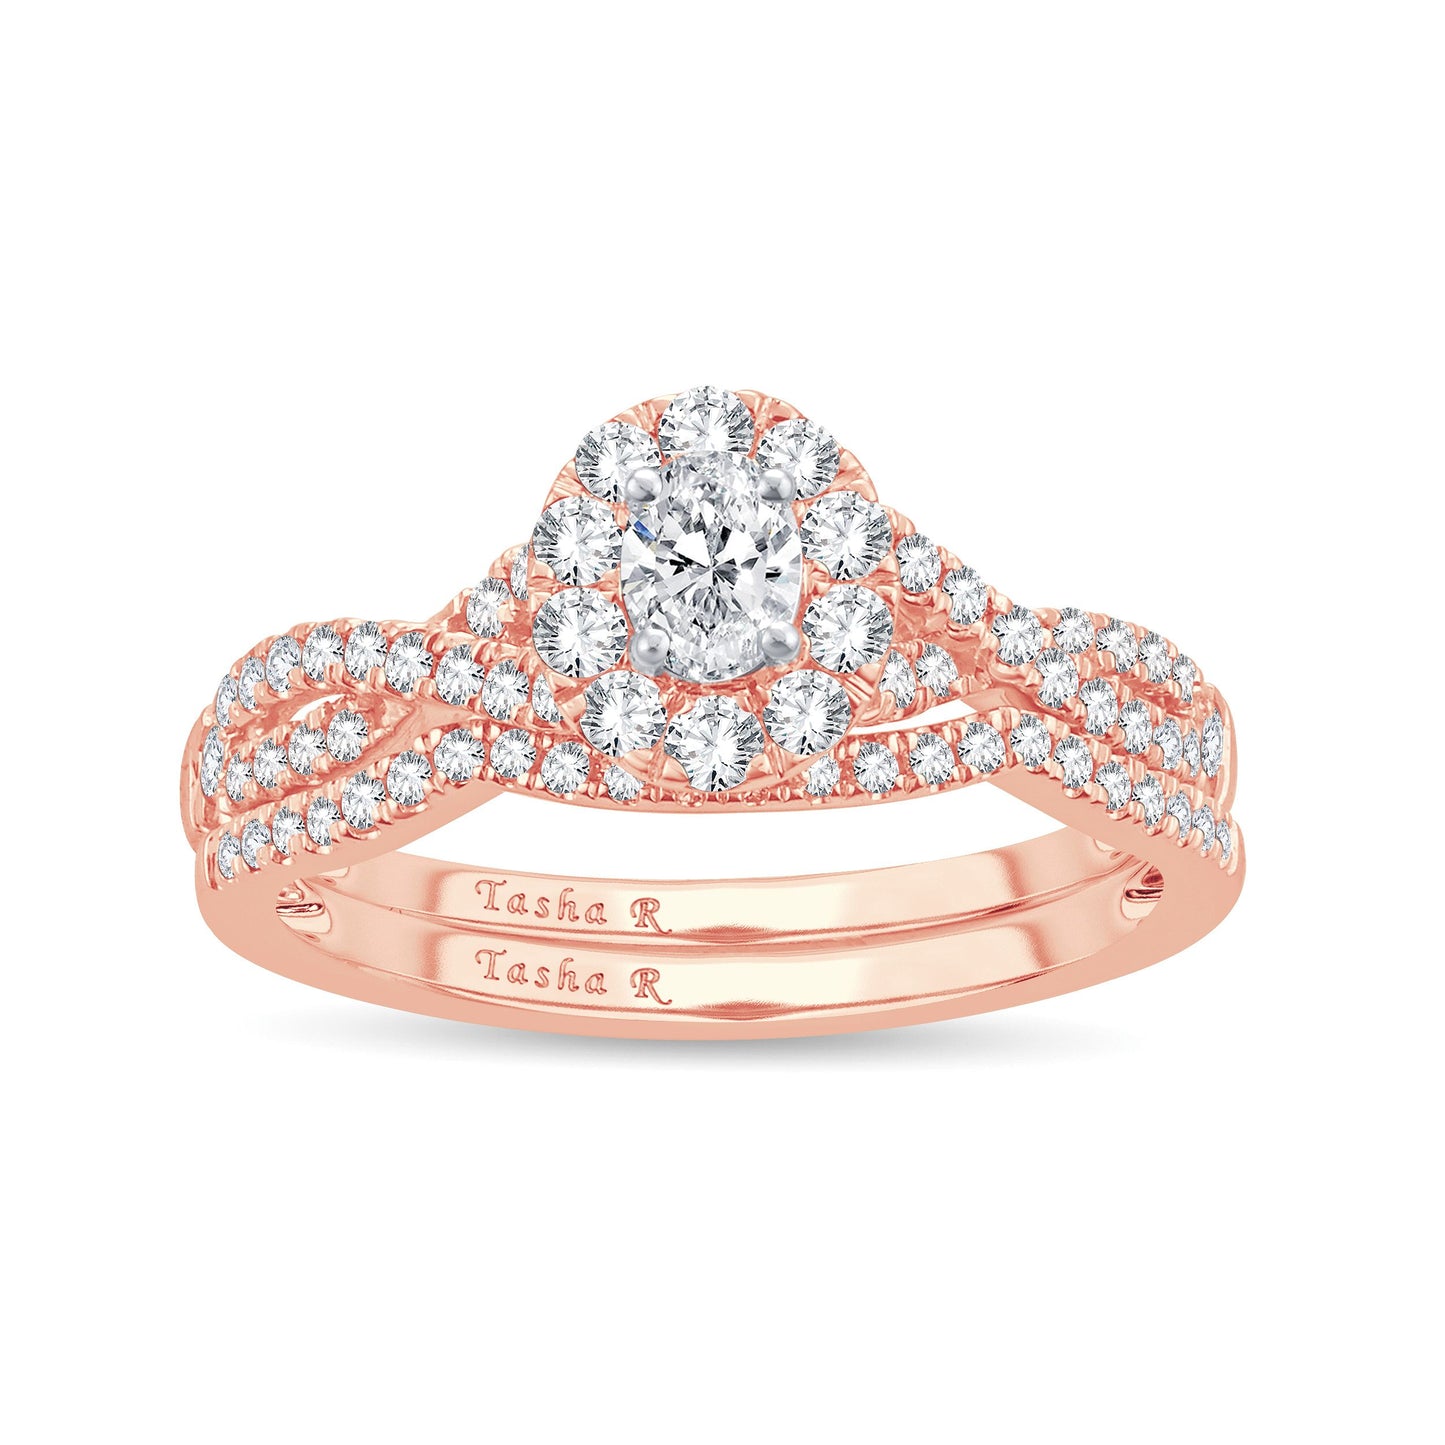 Diamond Engagement Ring with Matching Band - 0.74 Carats in 14KT Rose Gold